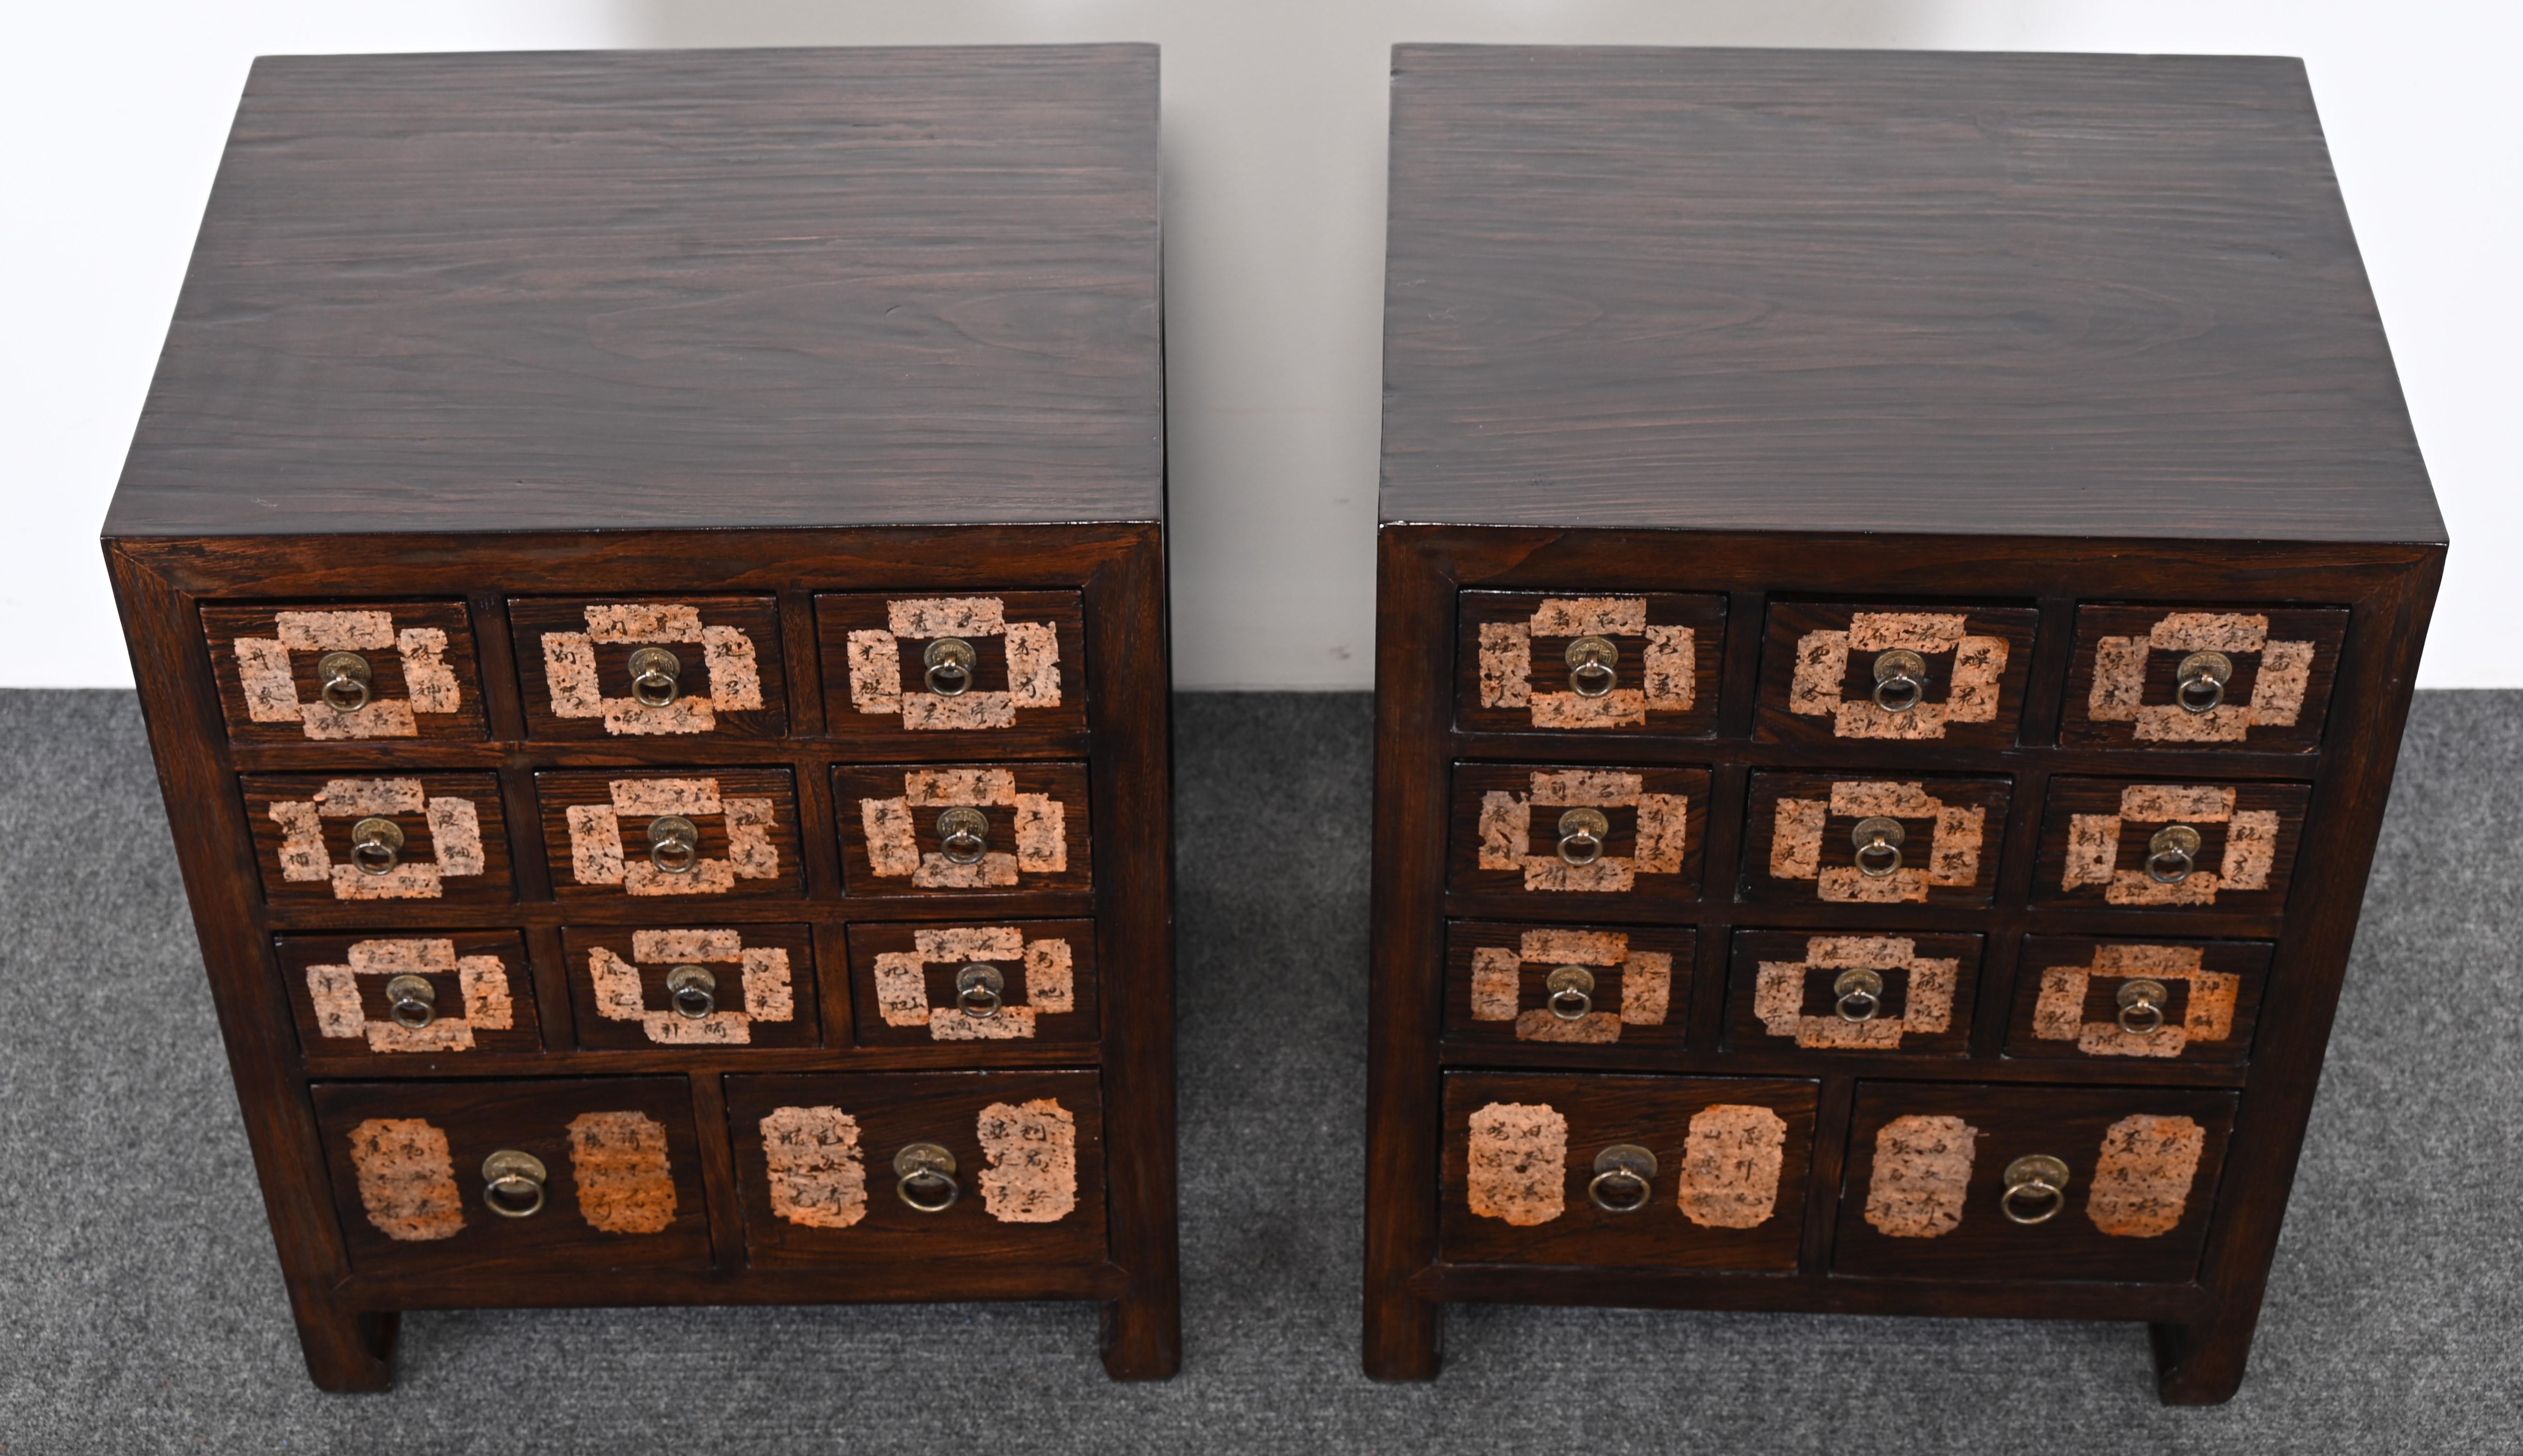 A unique pair of Chinese Apothecary Sidetables or Bedside Tables with multi-drawers made of Elmwood, Chinese paper, and brass medallion hardware or drawer pulls. The Asian cabinets or end tables are functional and can be great storage for a bedroom